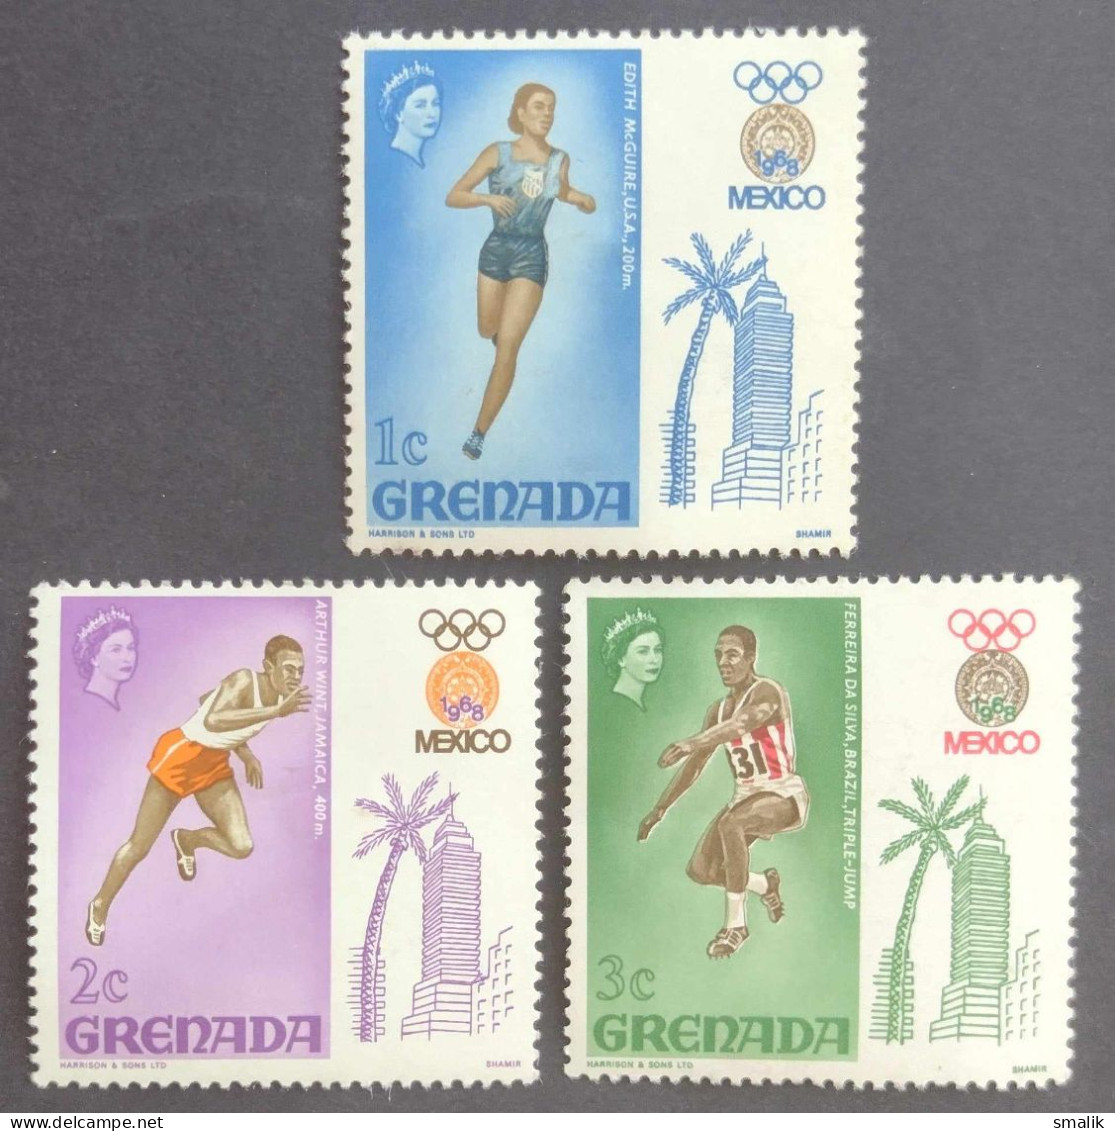 GRENADA (Former British Colony) 1968 - Mexico Olympic Games, 3 Stamps, MH Mint Slightly Hinged - Grenade (...-1974)